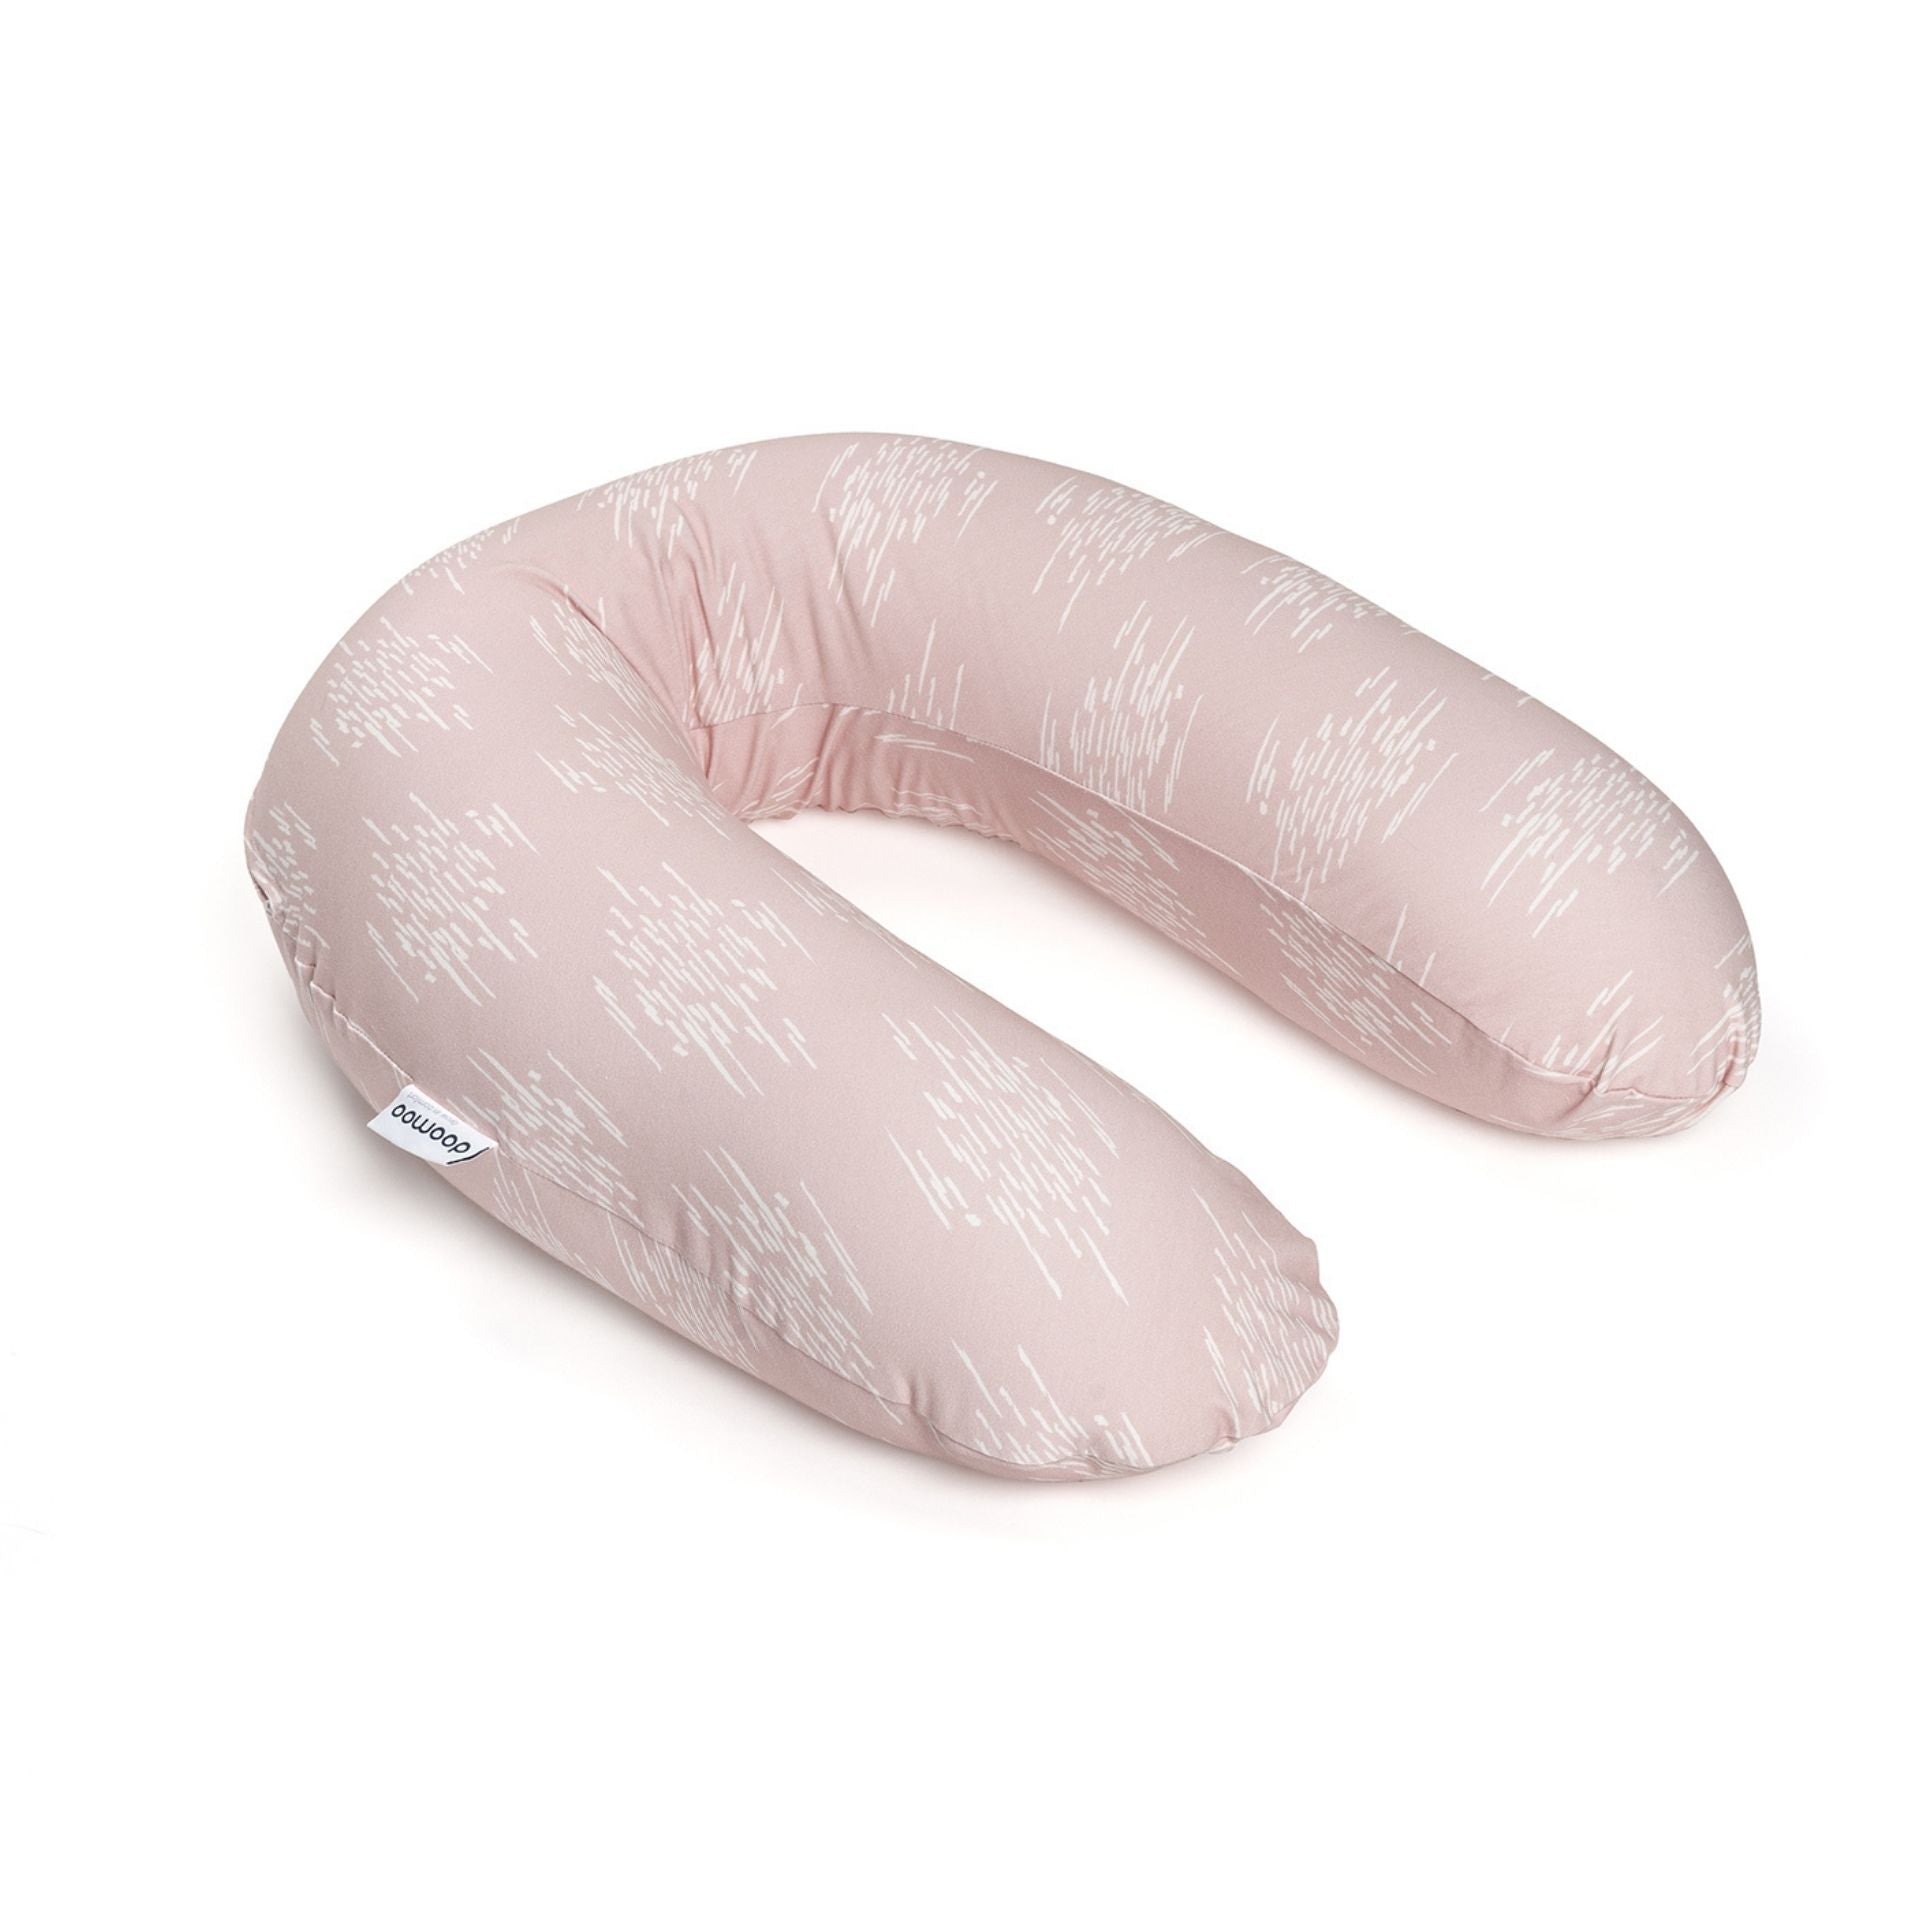 large maternity pillow. During pregnancy and for breastfeeding - doomoo Buddy Misty Pink